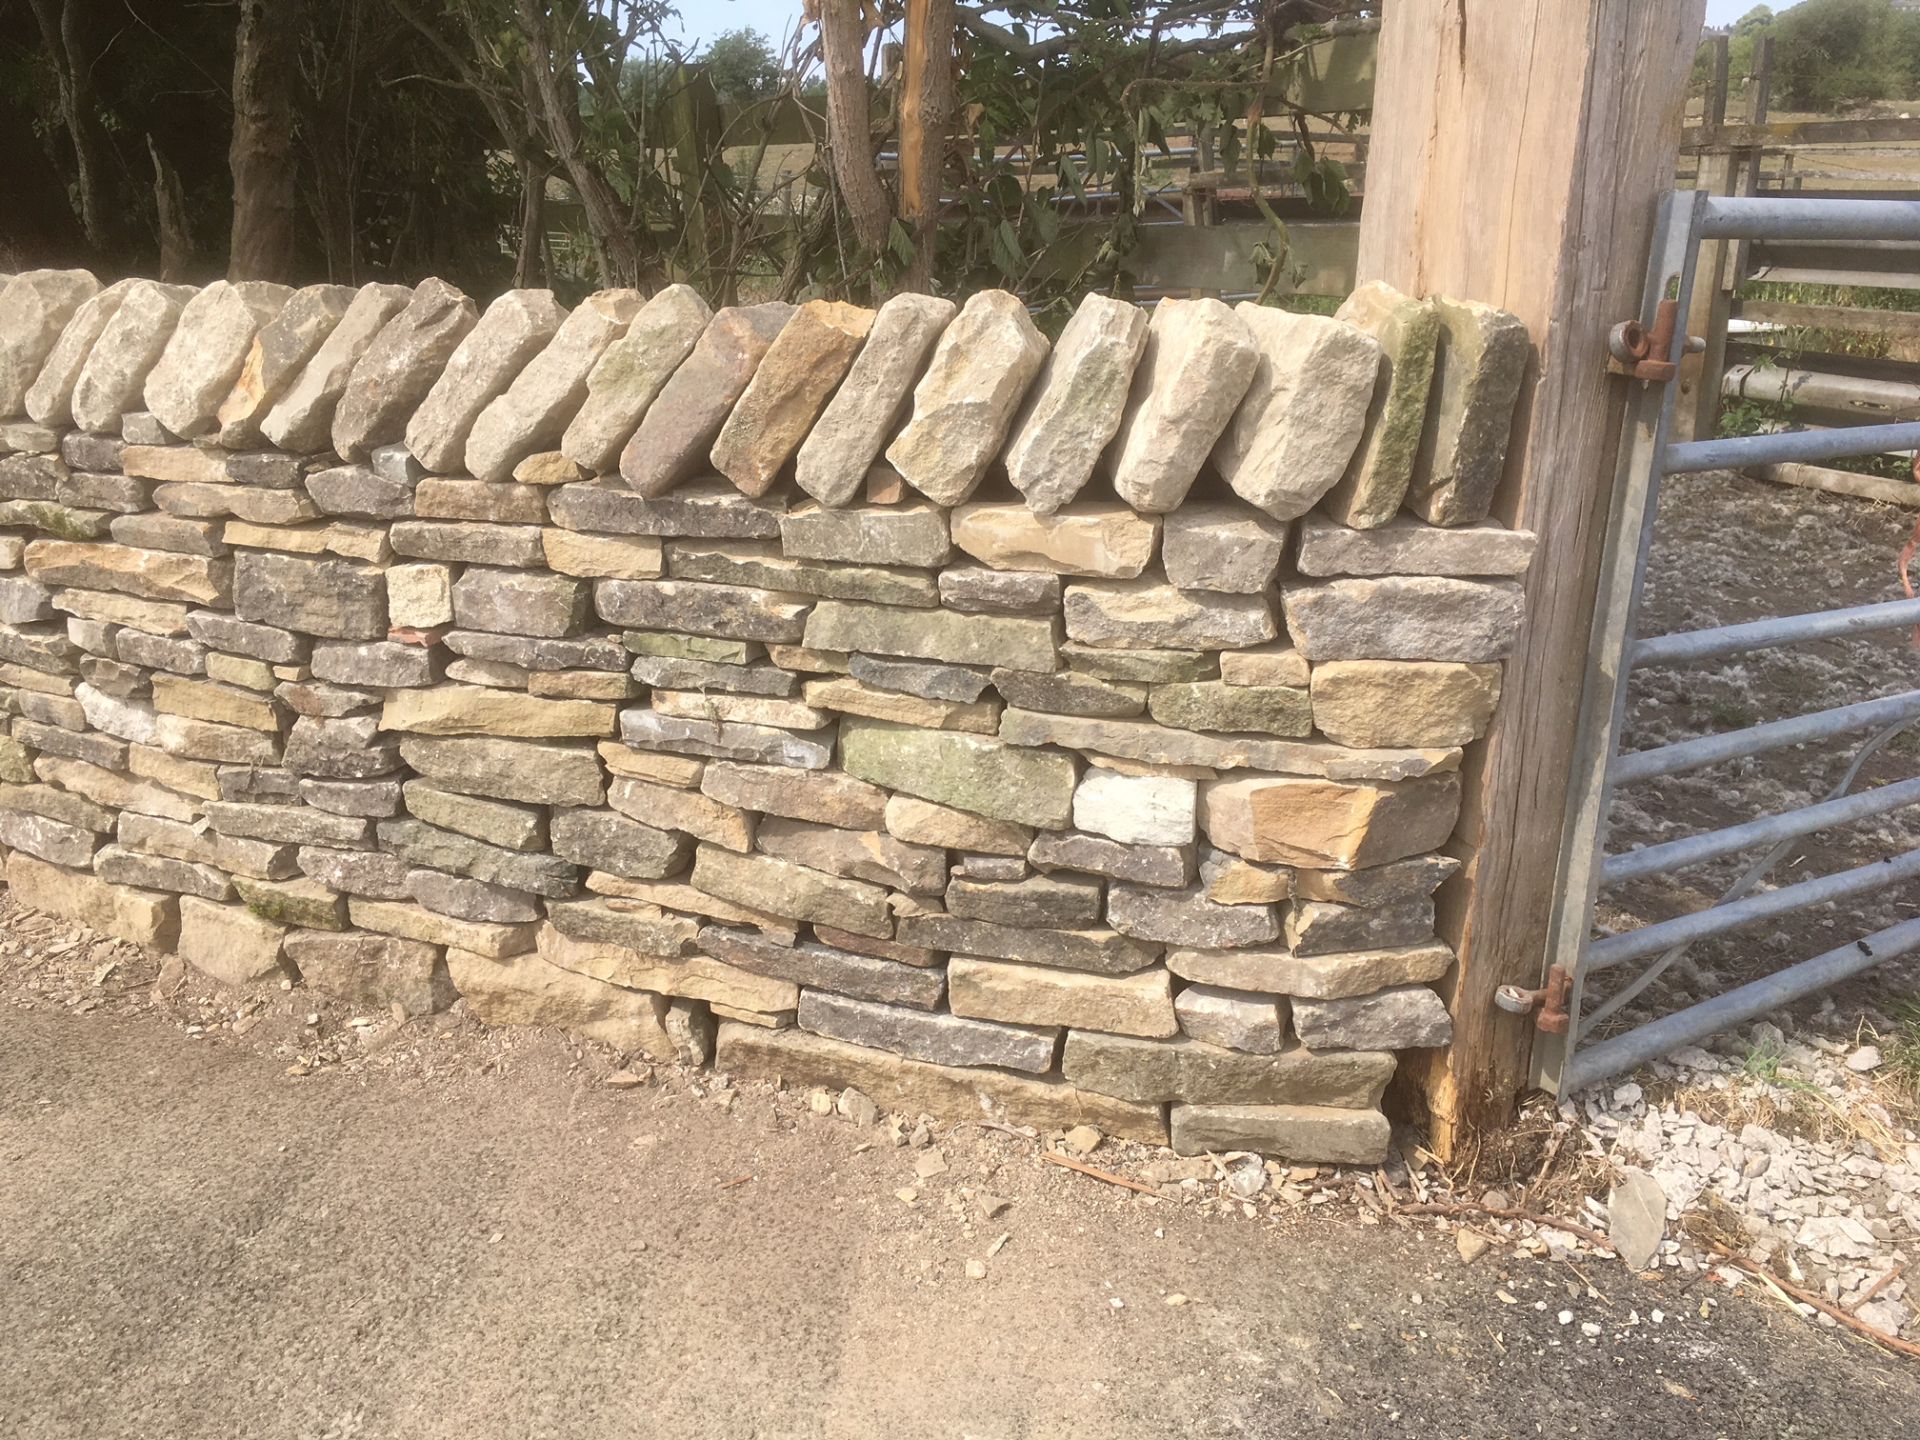 24 bulk bags Yorkshire Dry Stone Walling, each bag 1tonne, which approximately equates to 1m² of - Image 6 of 9